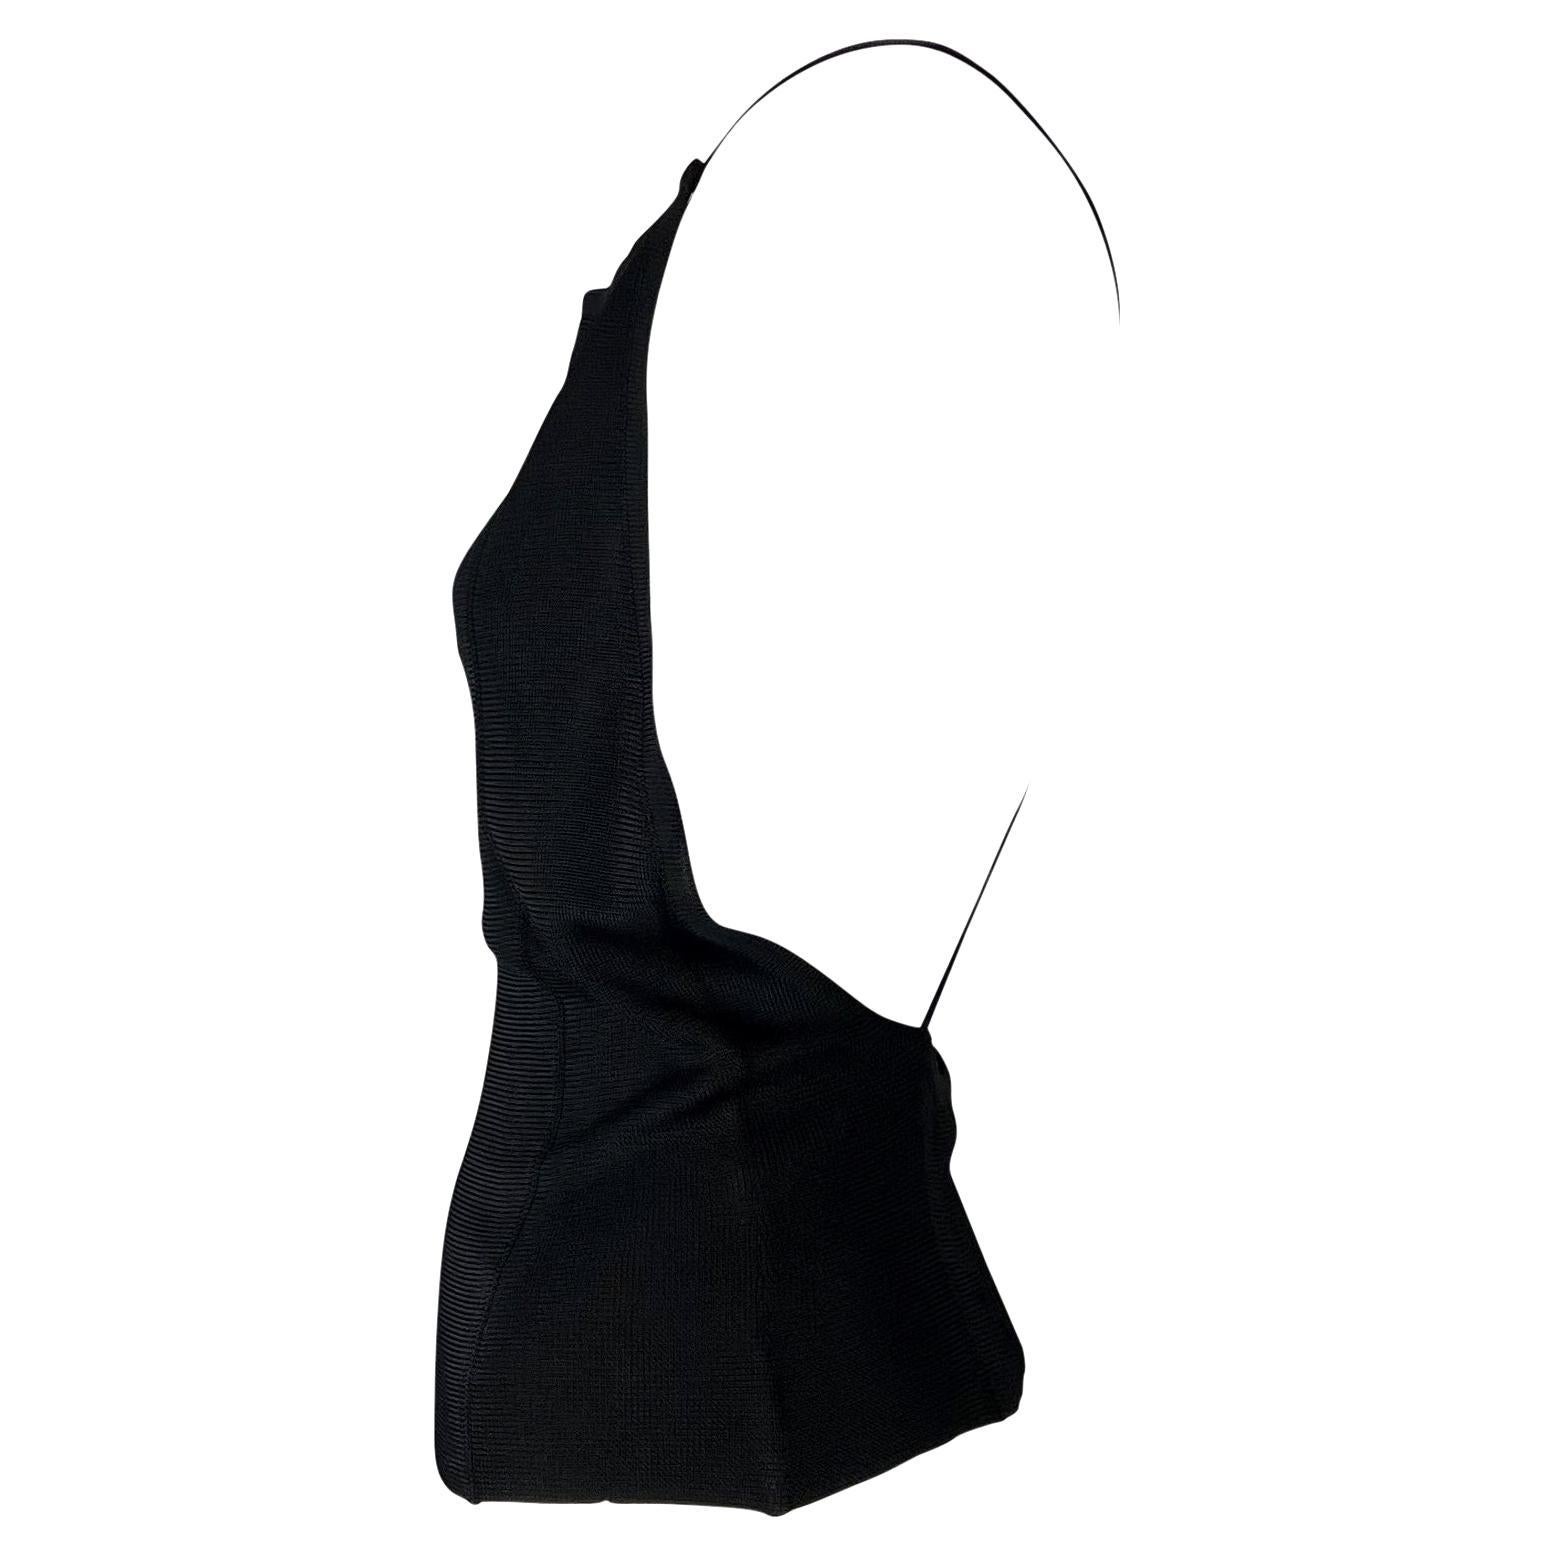 Presenting a stunning black backless Gucci top, designed by Tom Ford. From the Spring/Summer 1997 collection, this knit viscose top features a wide scoop neckline, spaghetti straps, and an open back. The spaghetti straps continue on the back,